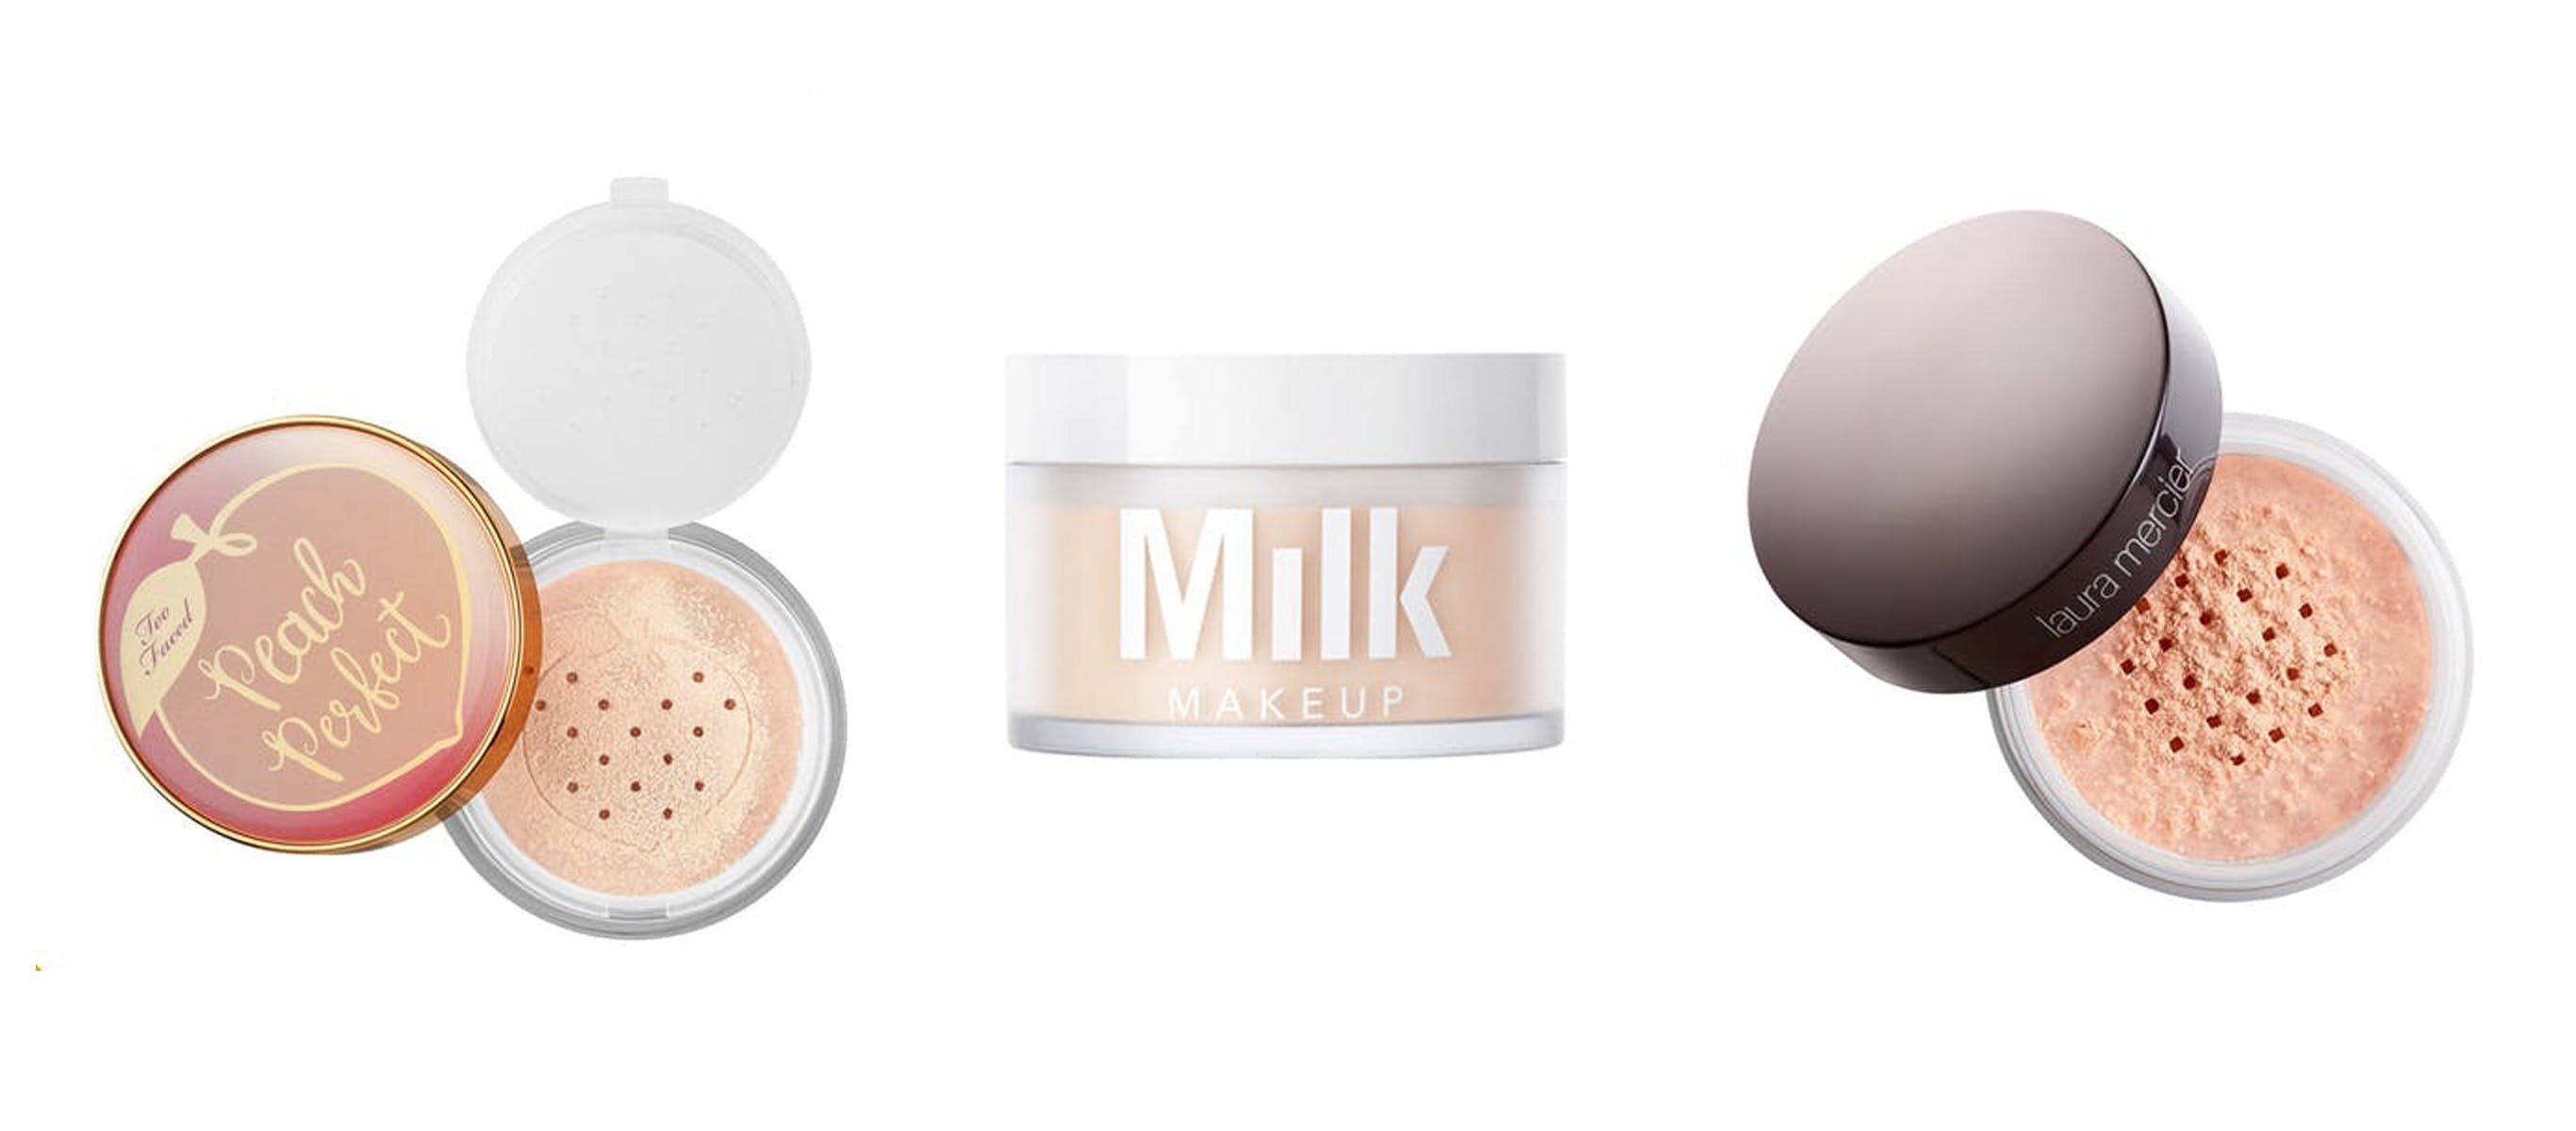 best makeup powder for dry skin